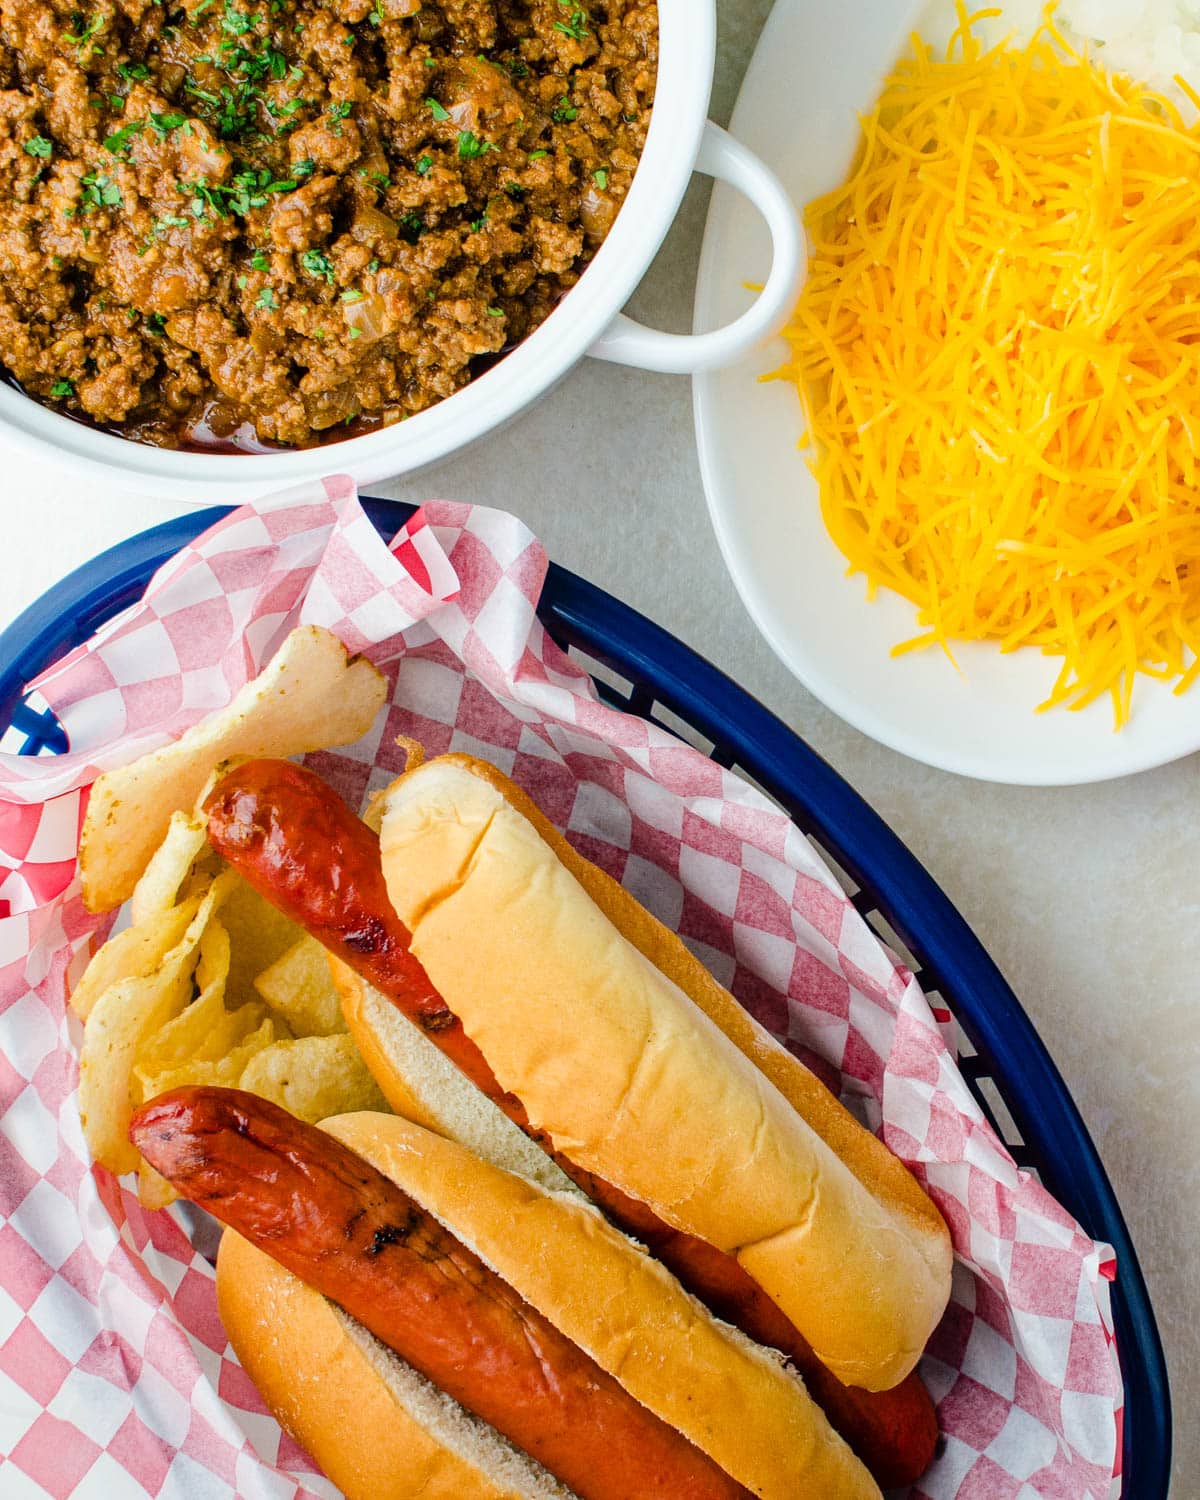 Grilled hot dogs in their buns with toppings on the side.